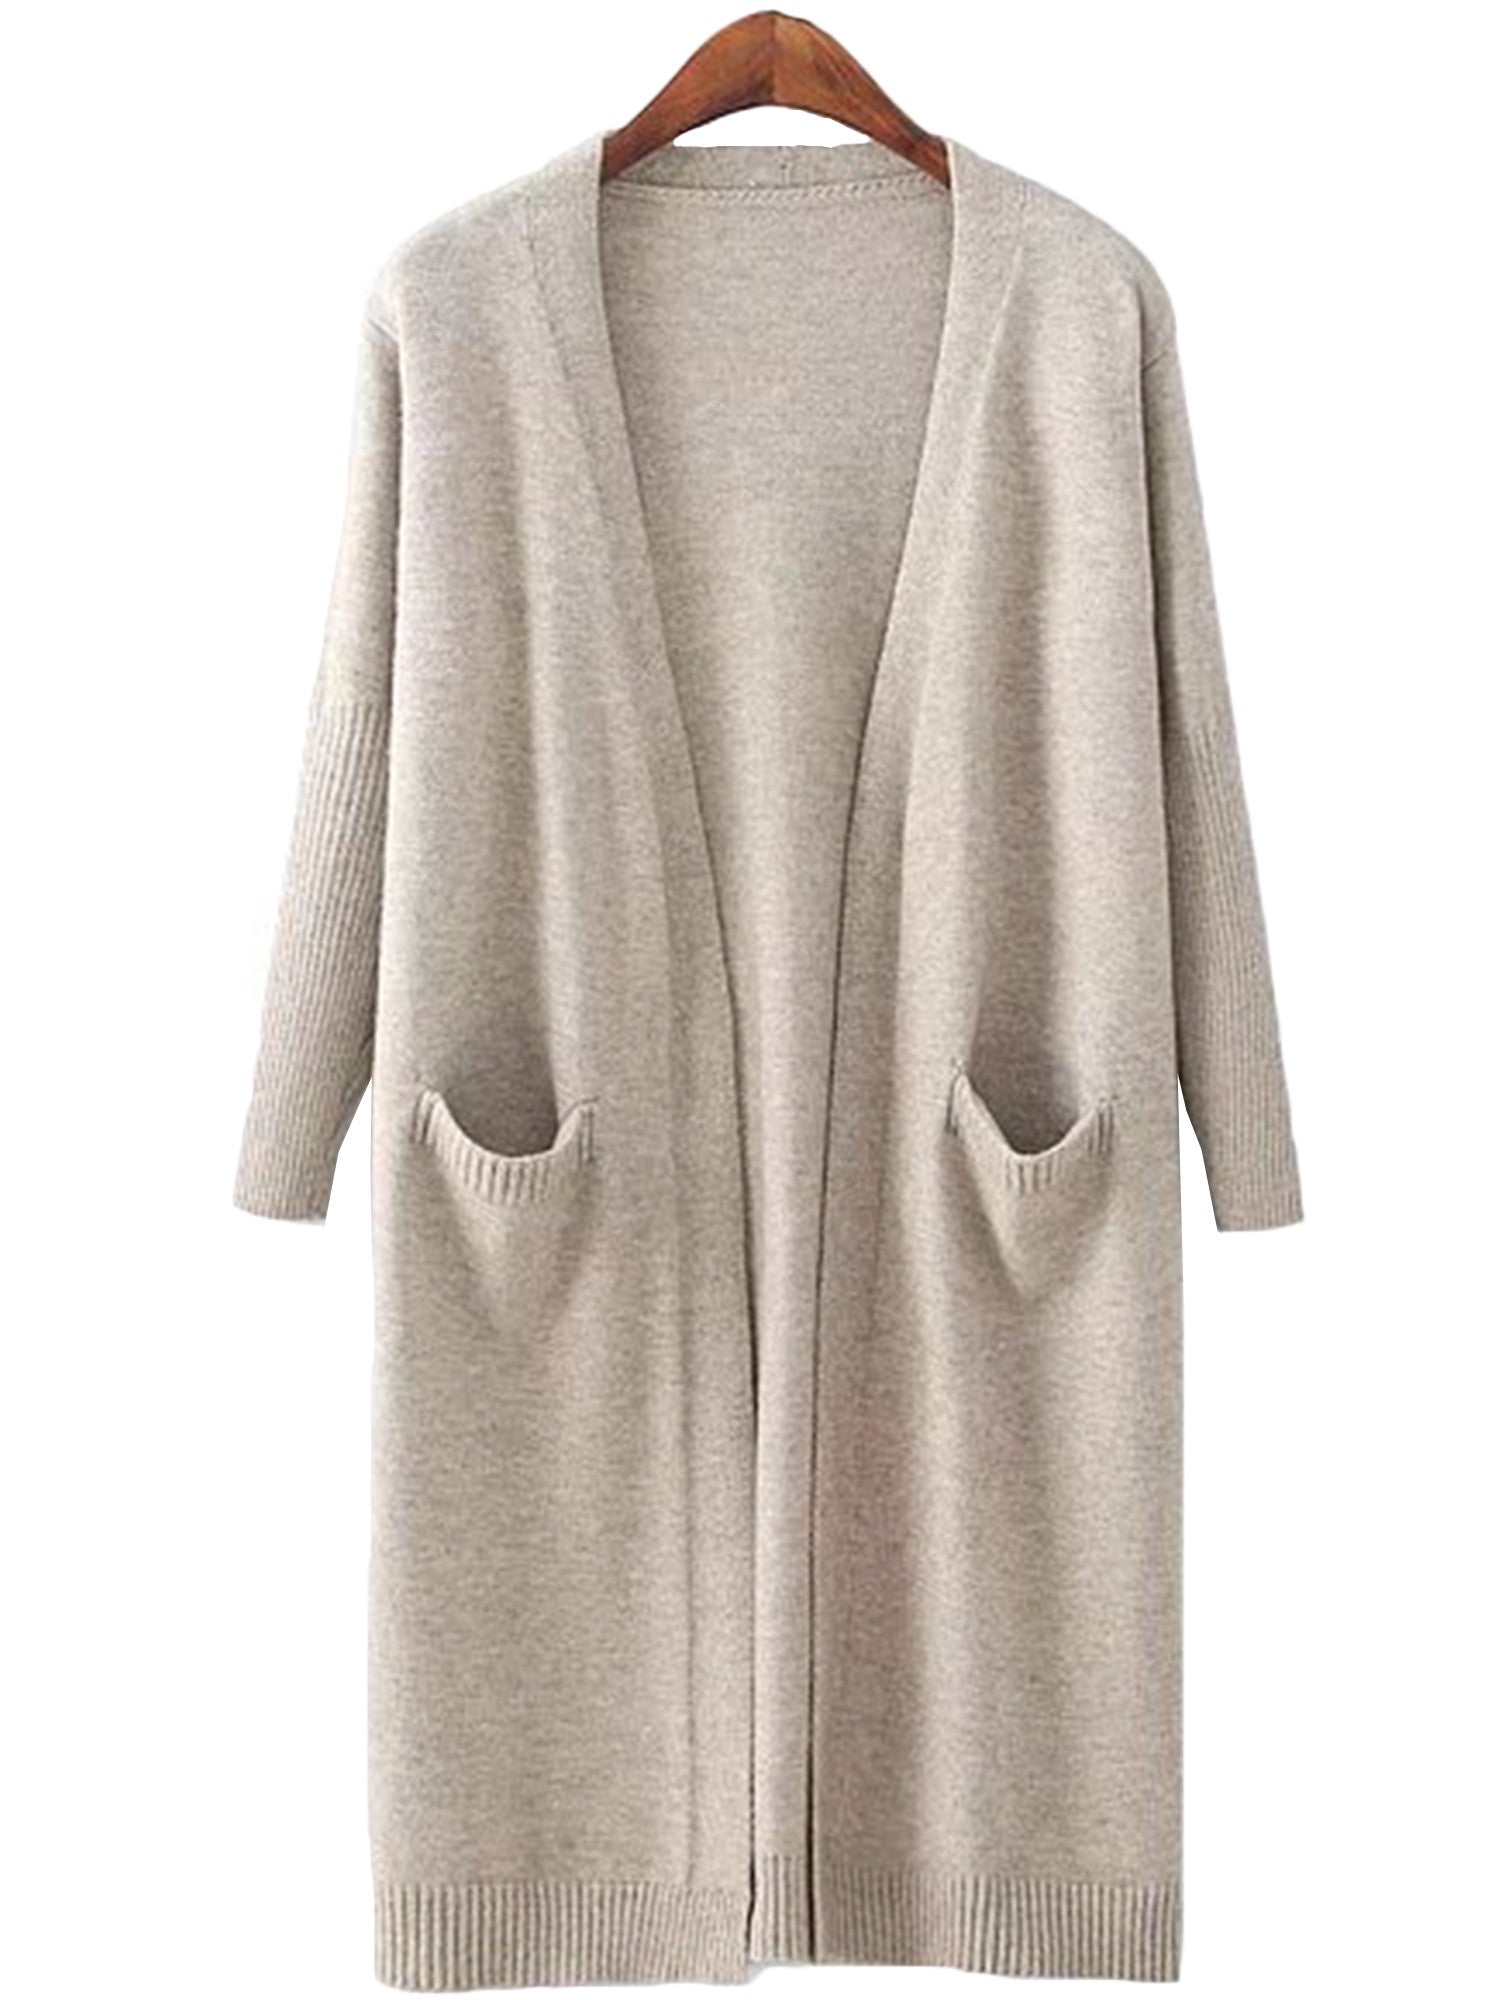 'Carrie' Open Wrap Pocket Long Cardigan – Goodnight Macaroon